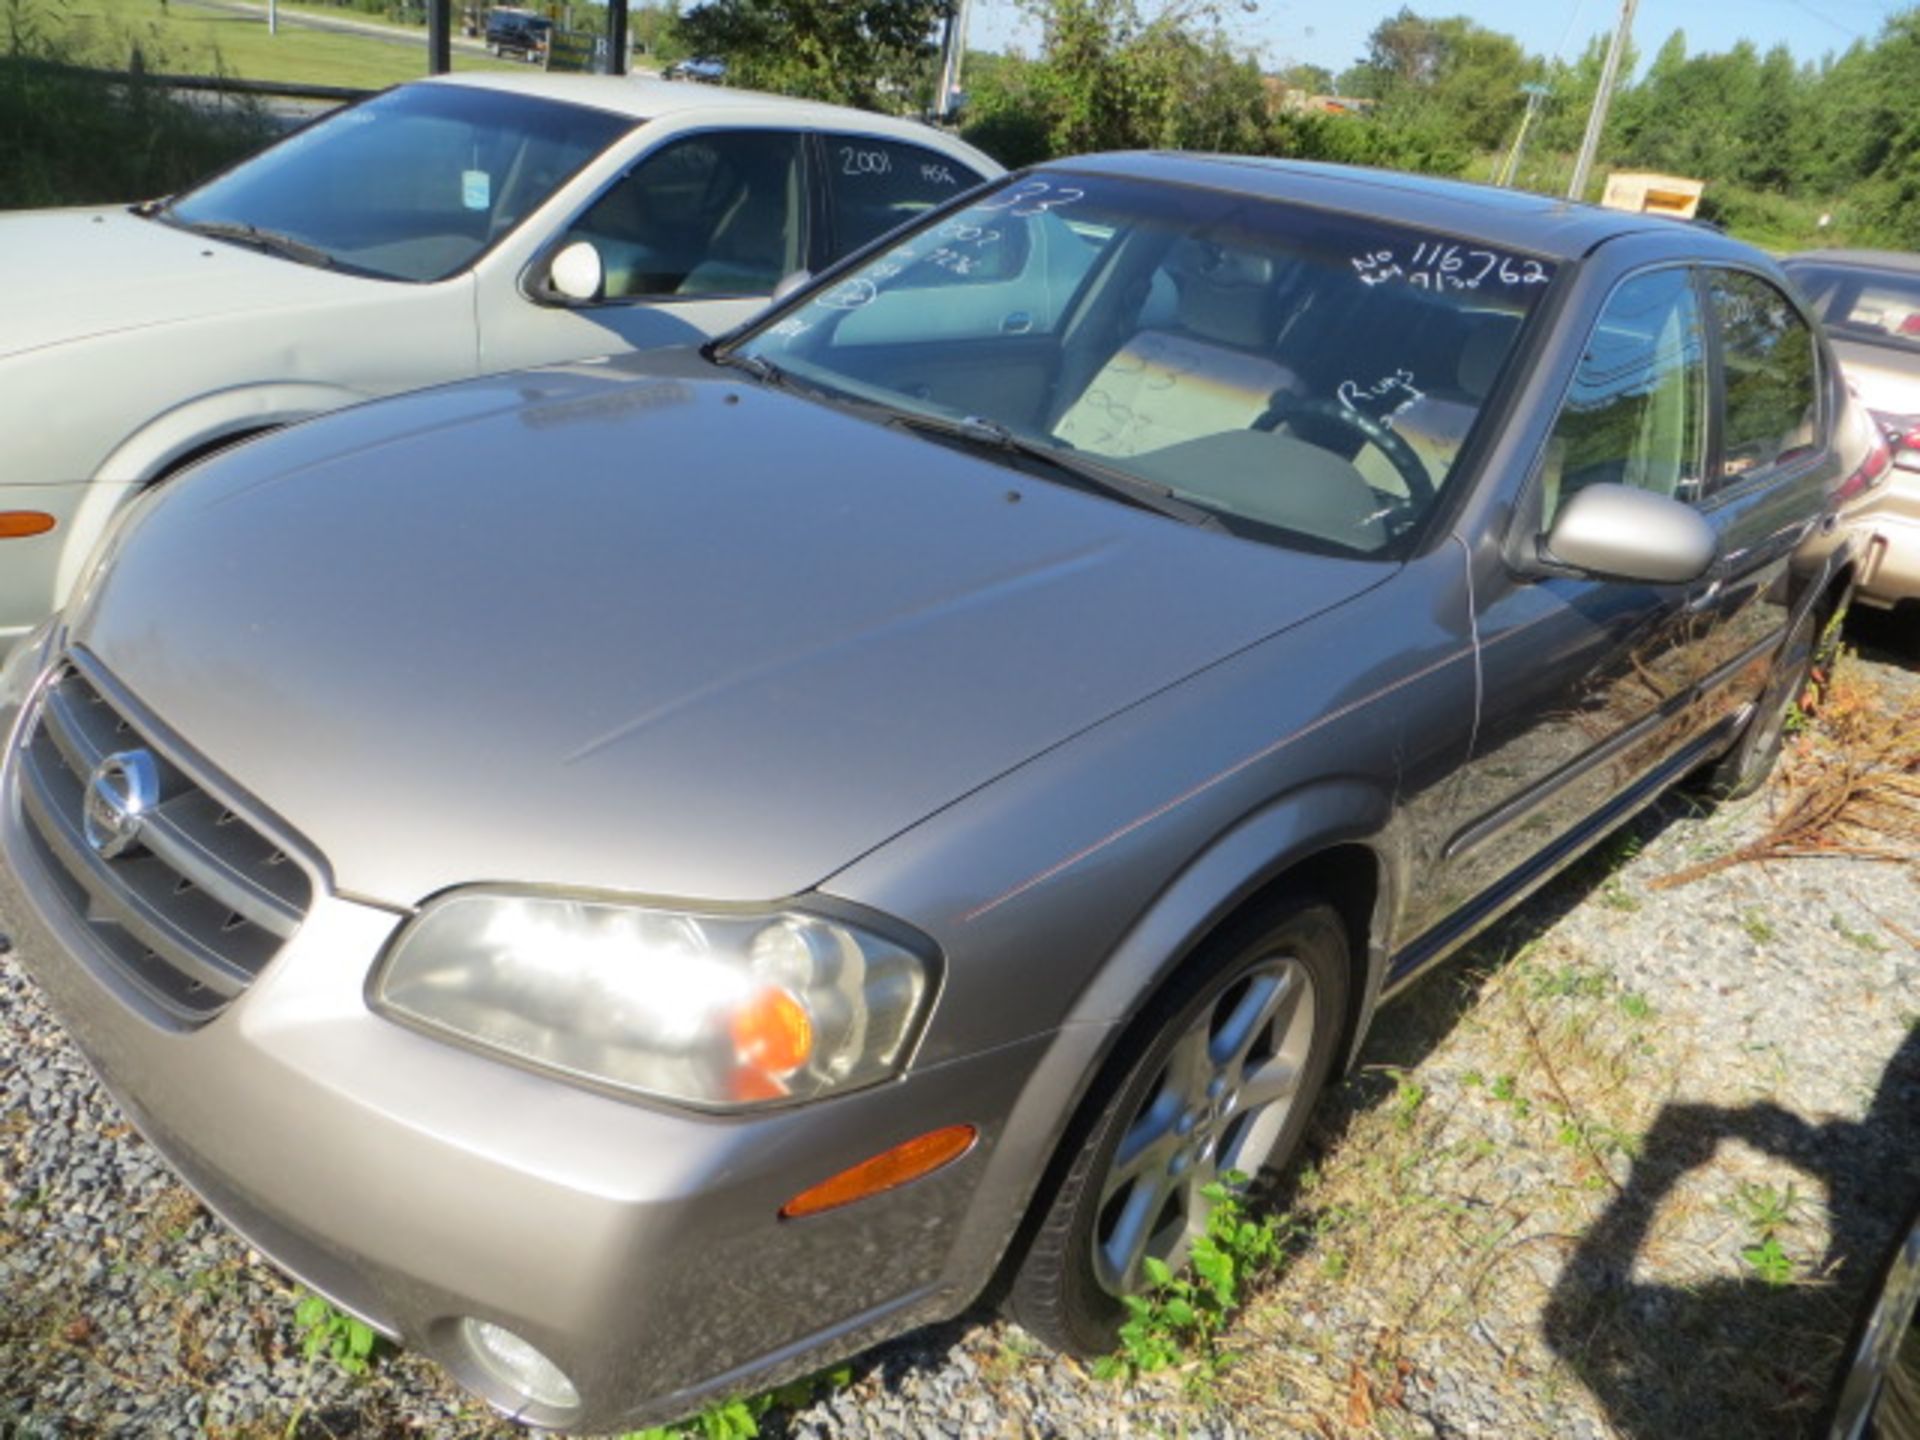 2002 Nissan Maxima SE- 116000 MILES,VIN JN1DA31D12T437236, SOLD WITH GOOD TRANSFERABLE TITLE - Image 2 of 3